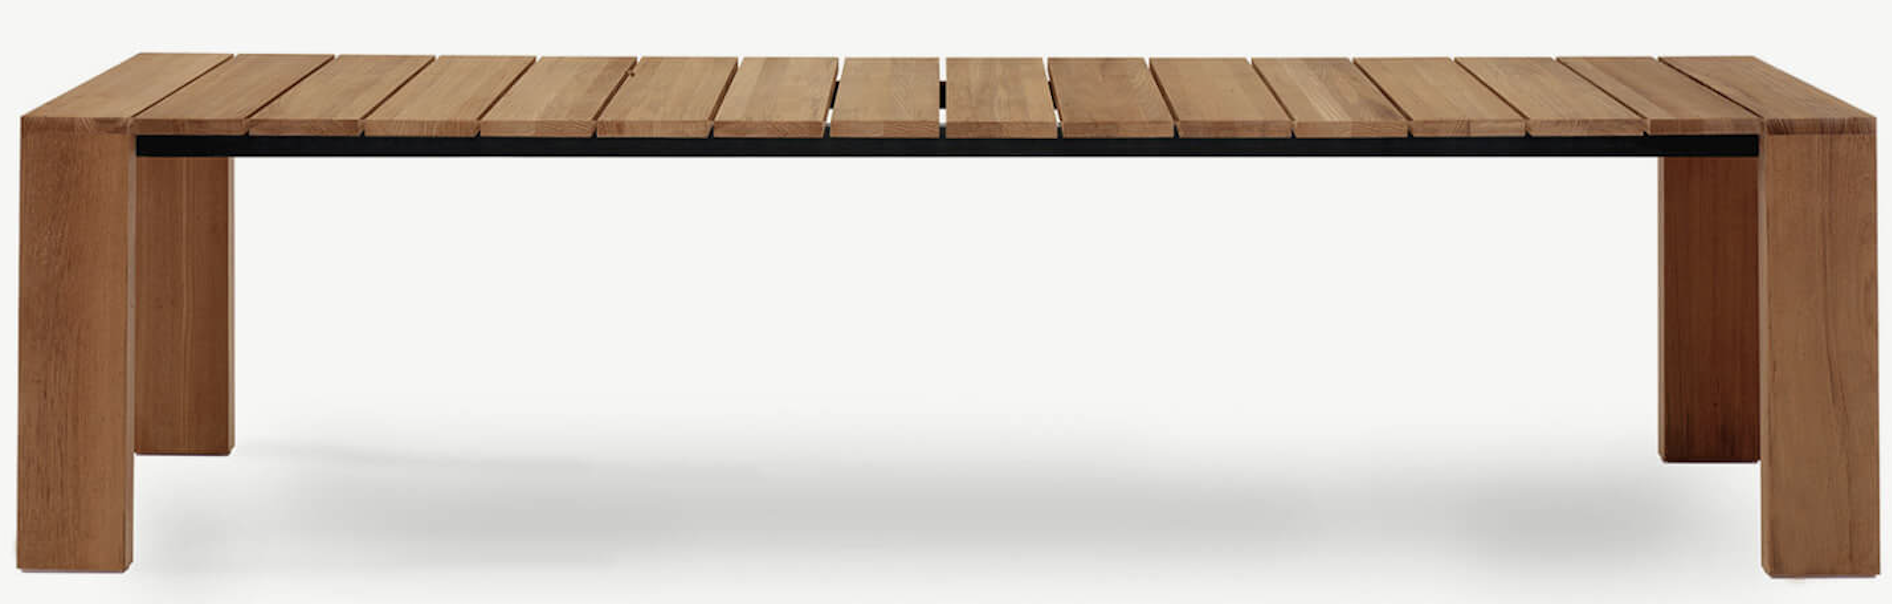 Product Image Pier Dining Table